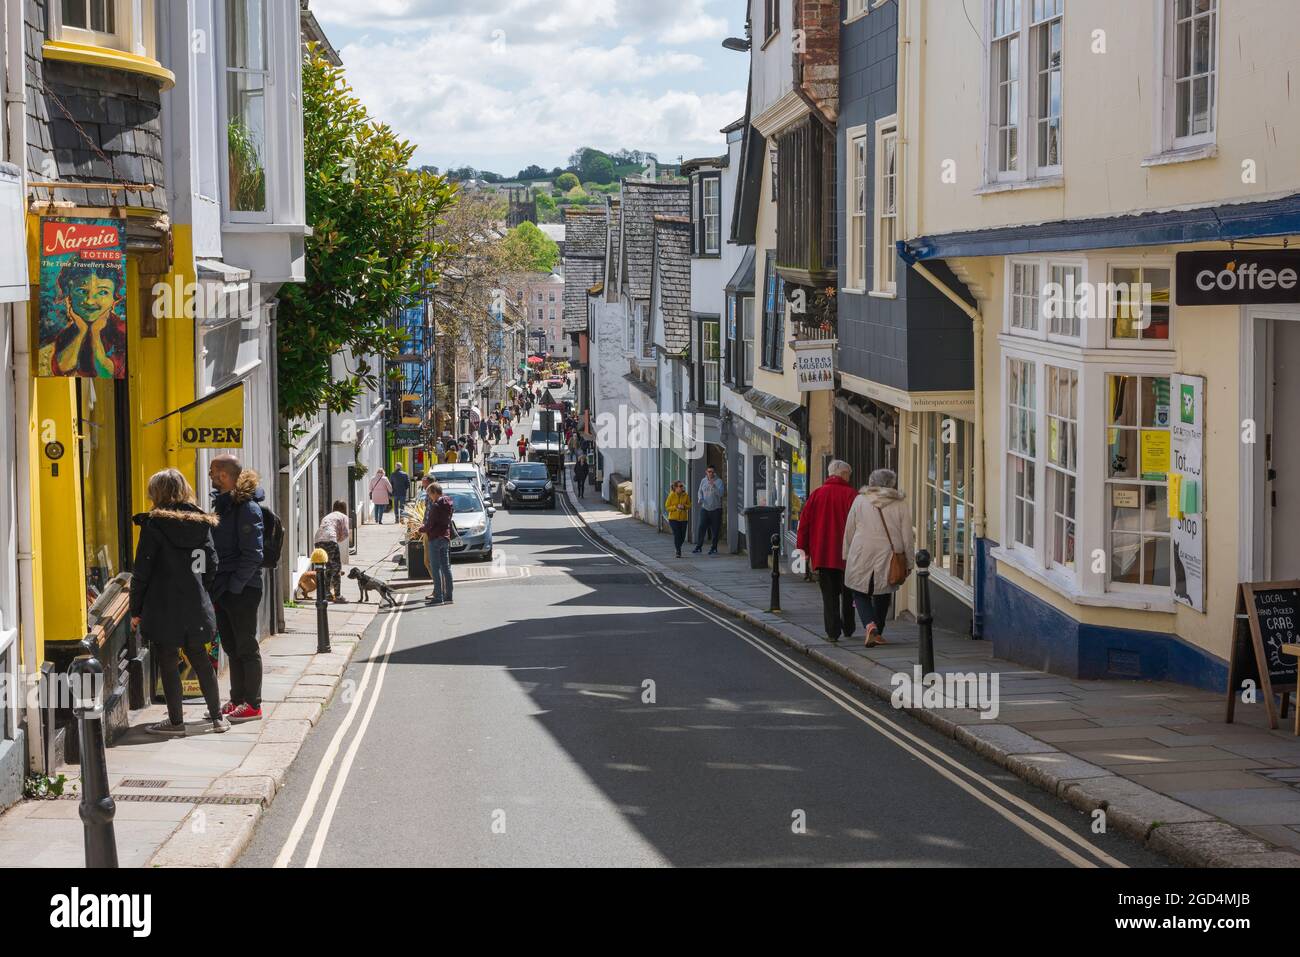 UK high street, view of traditional shops in the main shopping street (Fore Street) in Totnes, Devon, England, UK Stock Photo